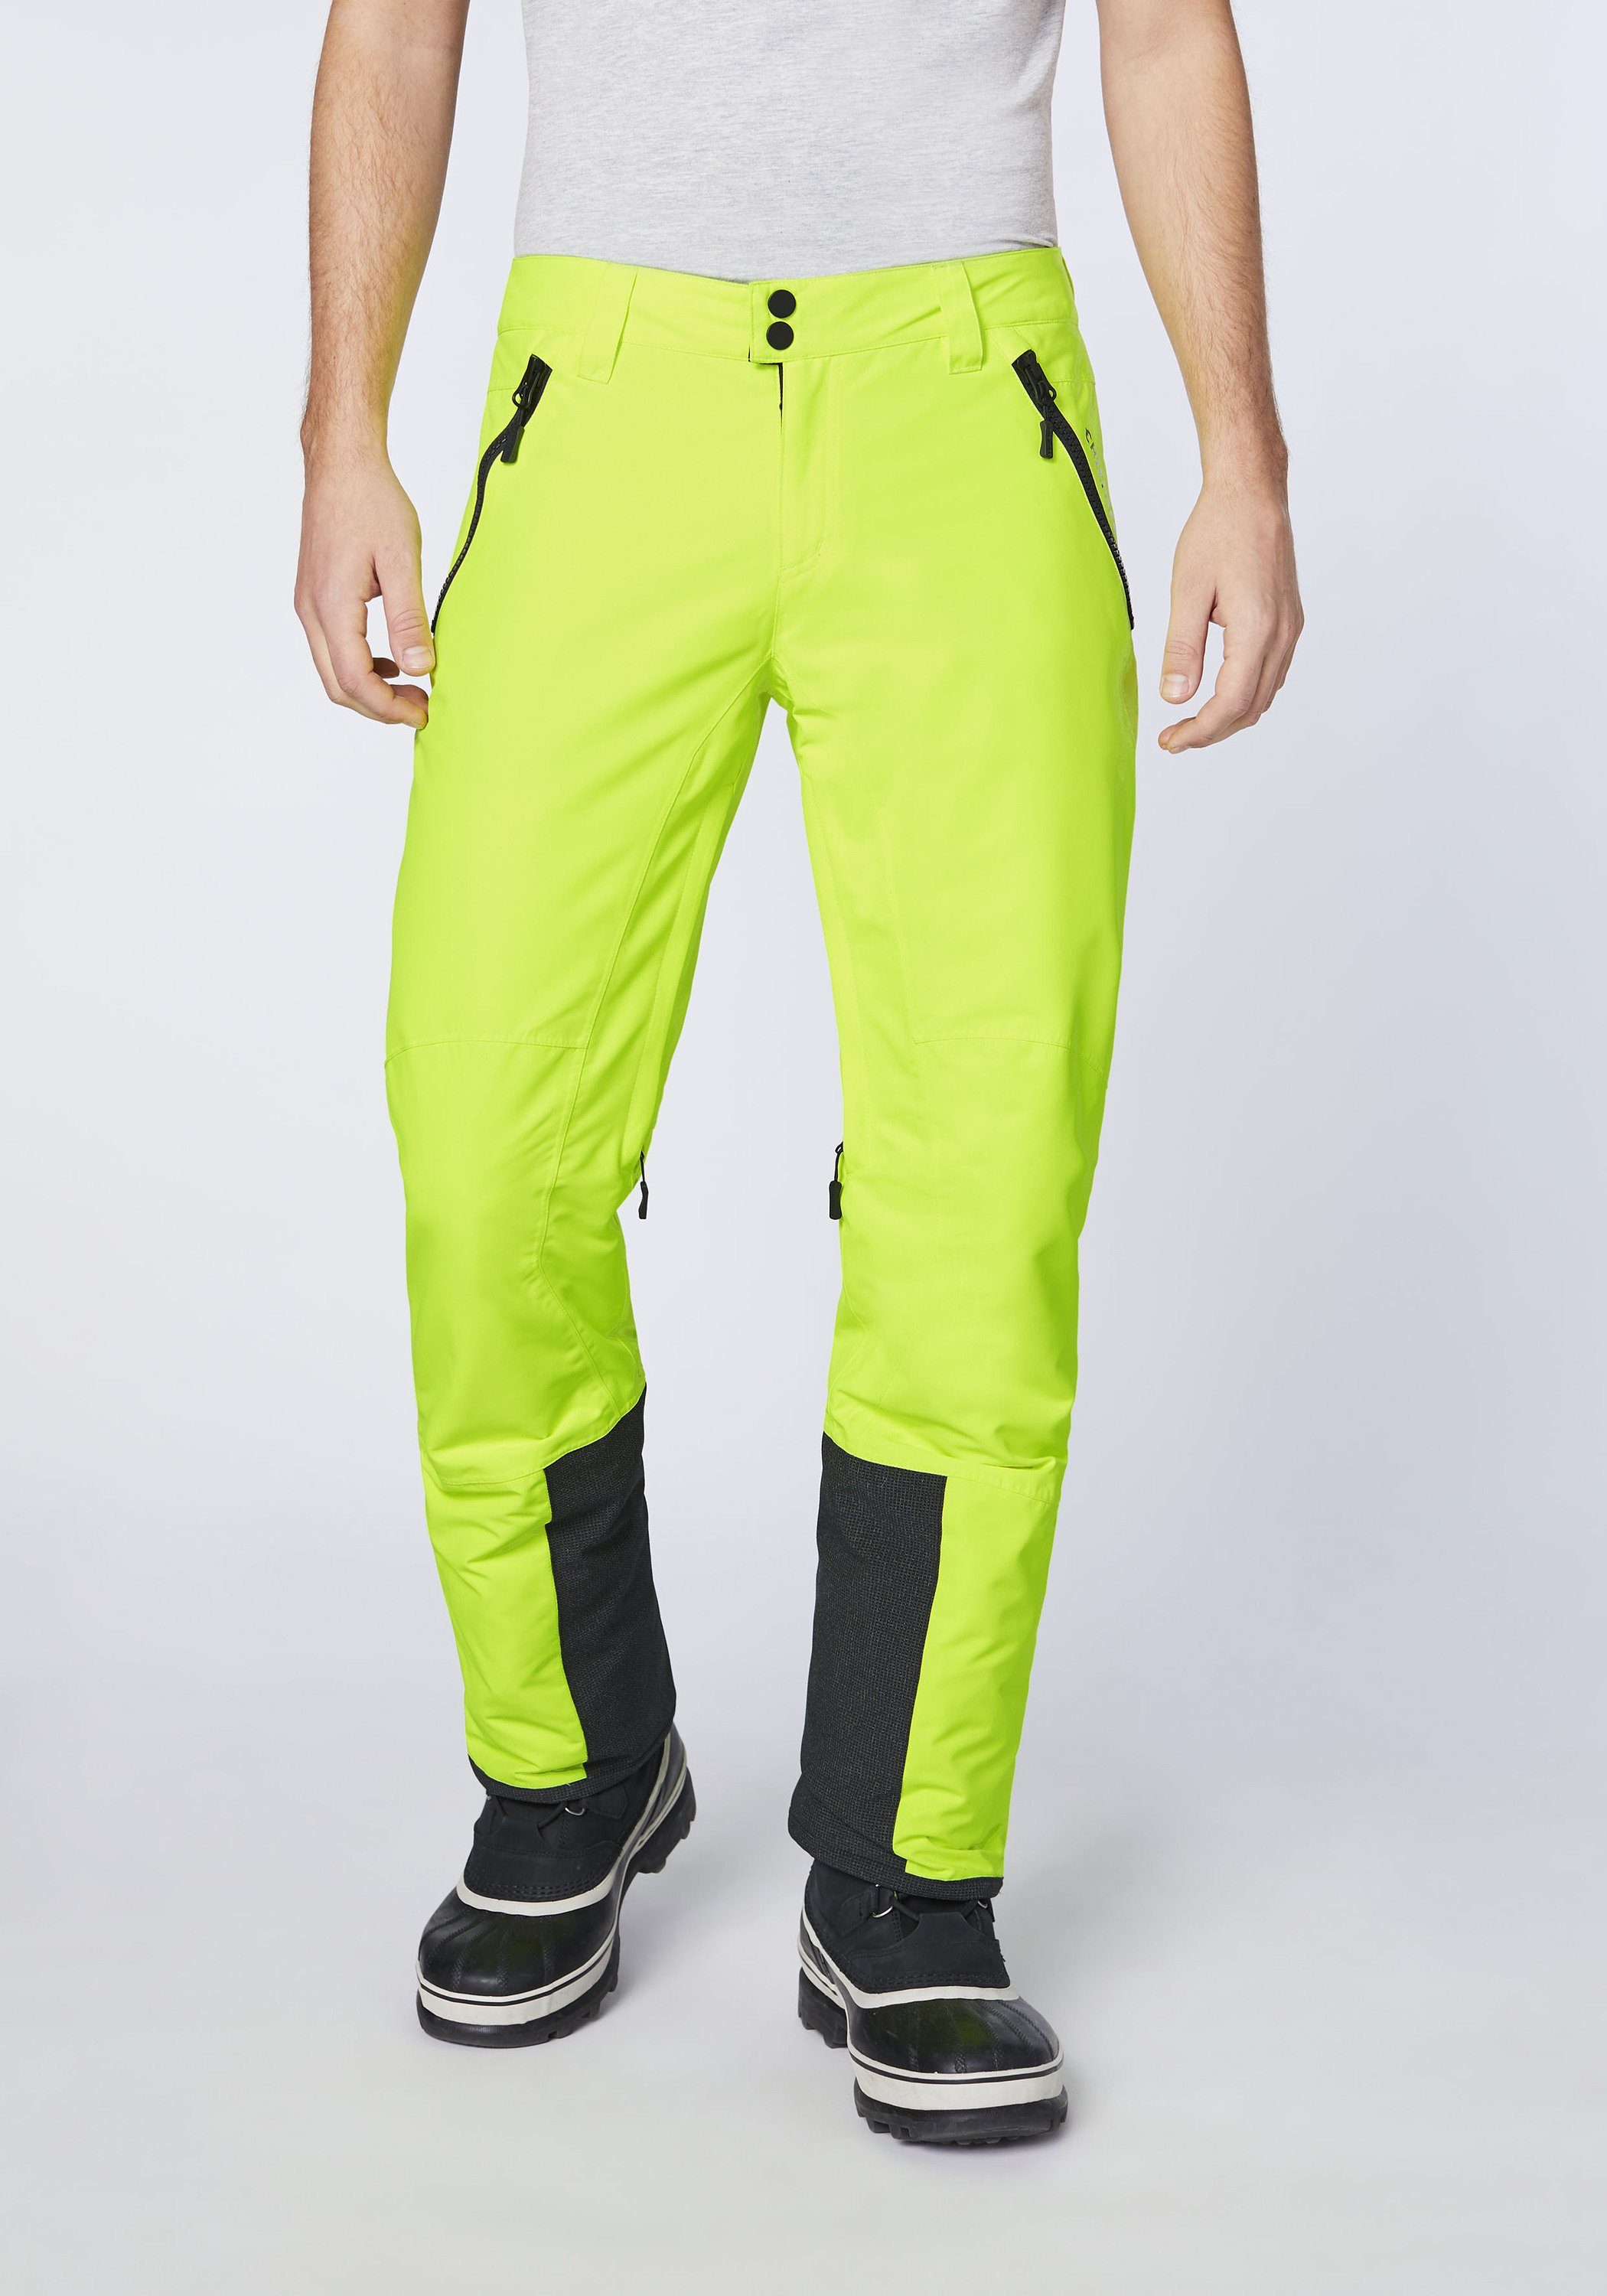 Chiemsee Sporthose mit Schneefang (1-tlg) Yellow Safety